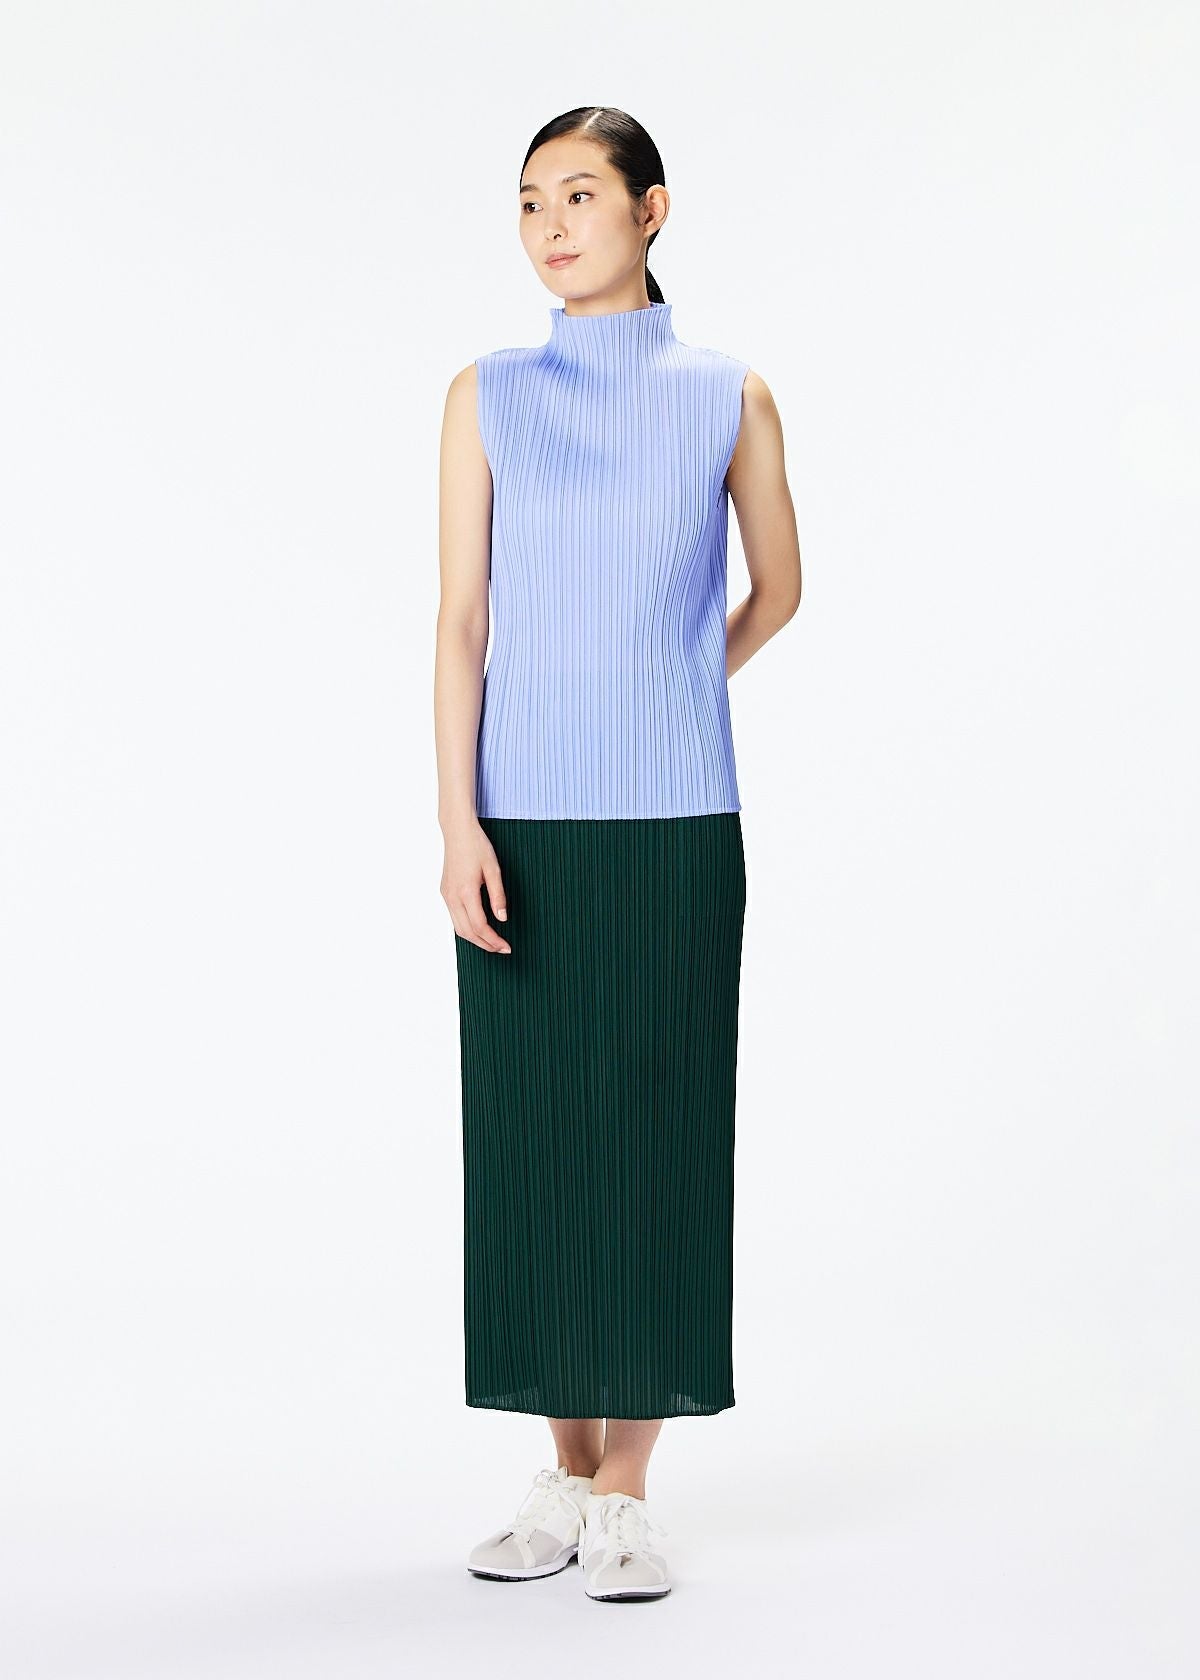 NEW COLORFUL BASICS 3 TOP | The official ISSEY MIYAKE ONLINE STORE 